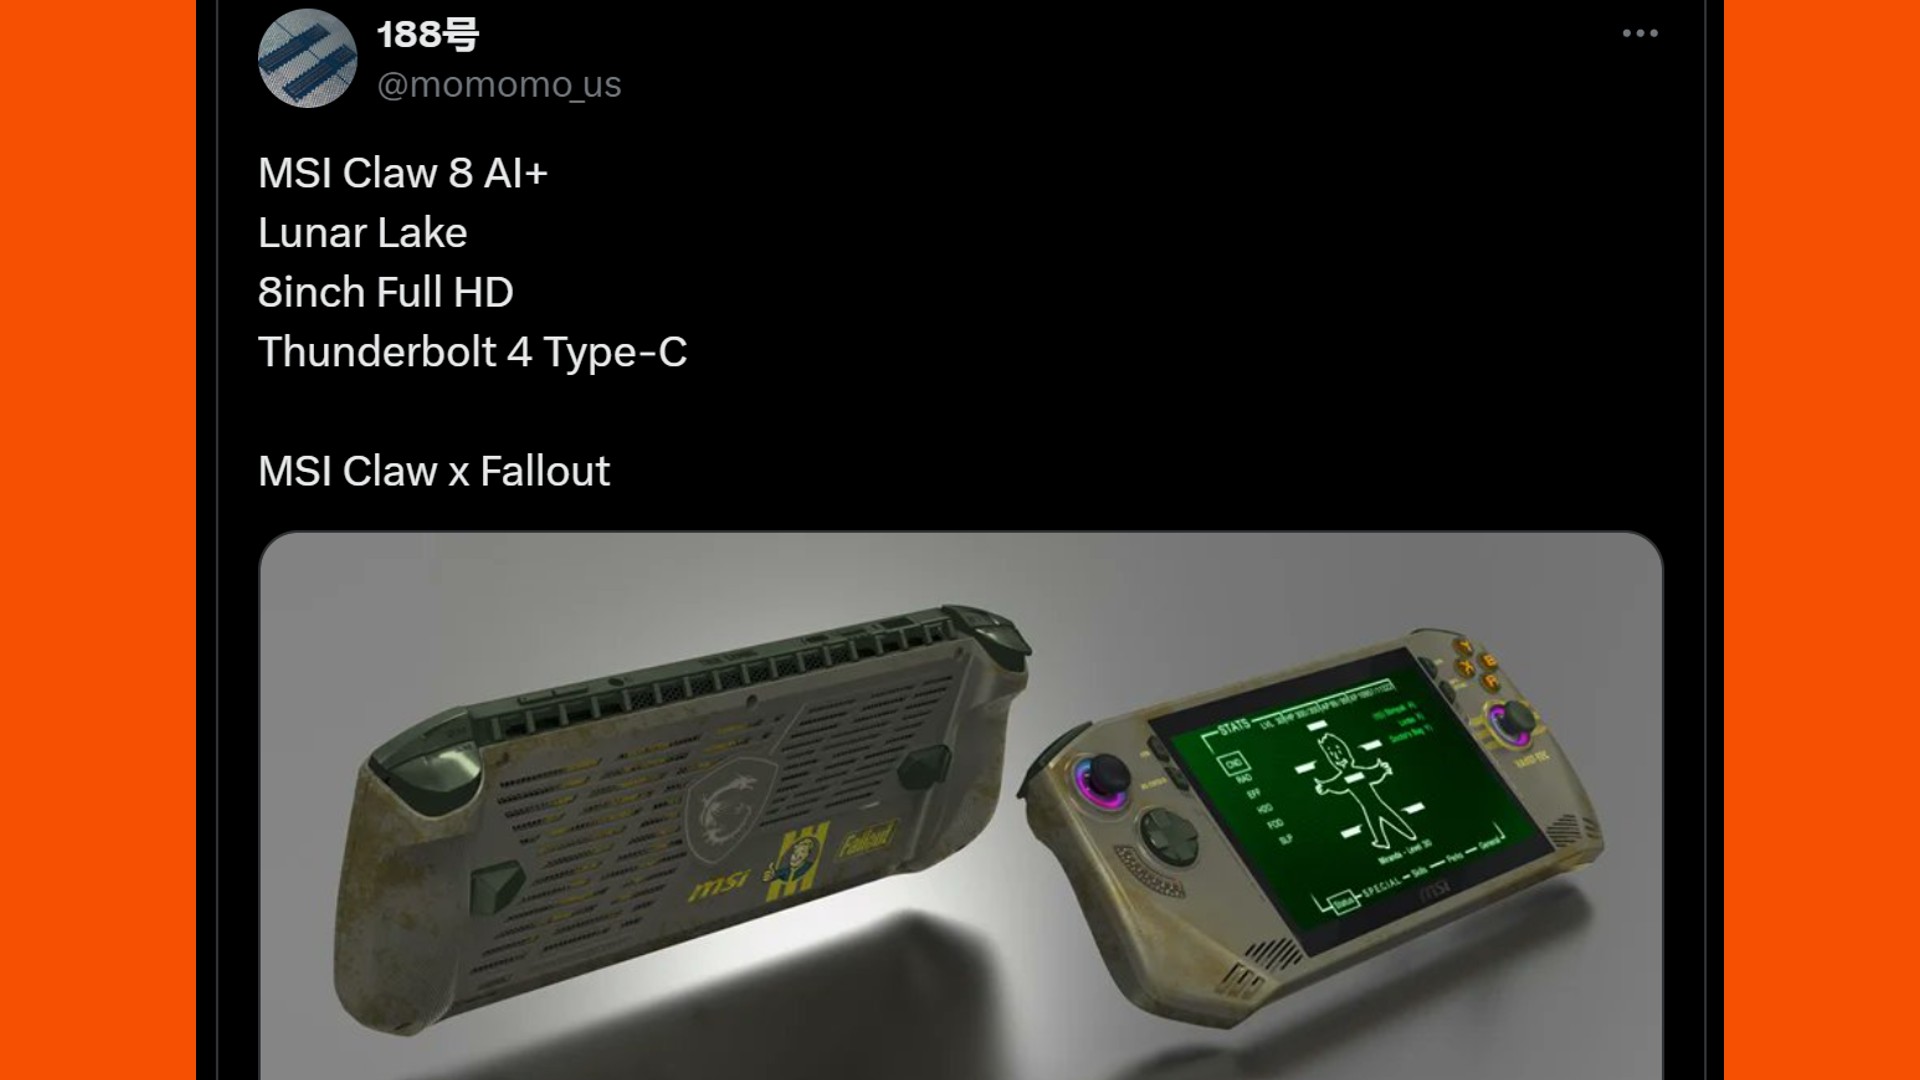 X post showcasing the Fallout MSI Claw and detail of the MSI Claw 8 AI+